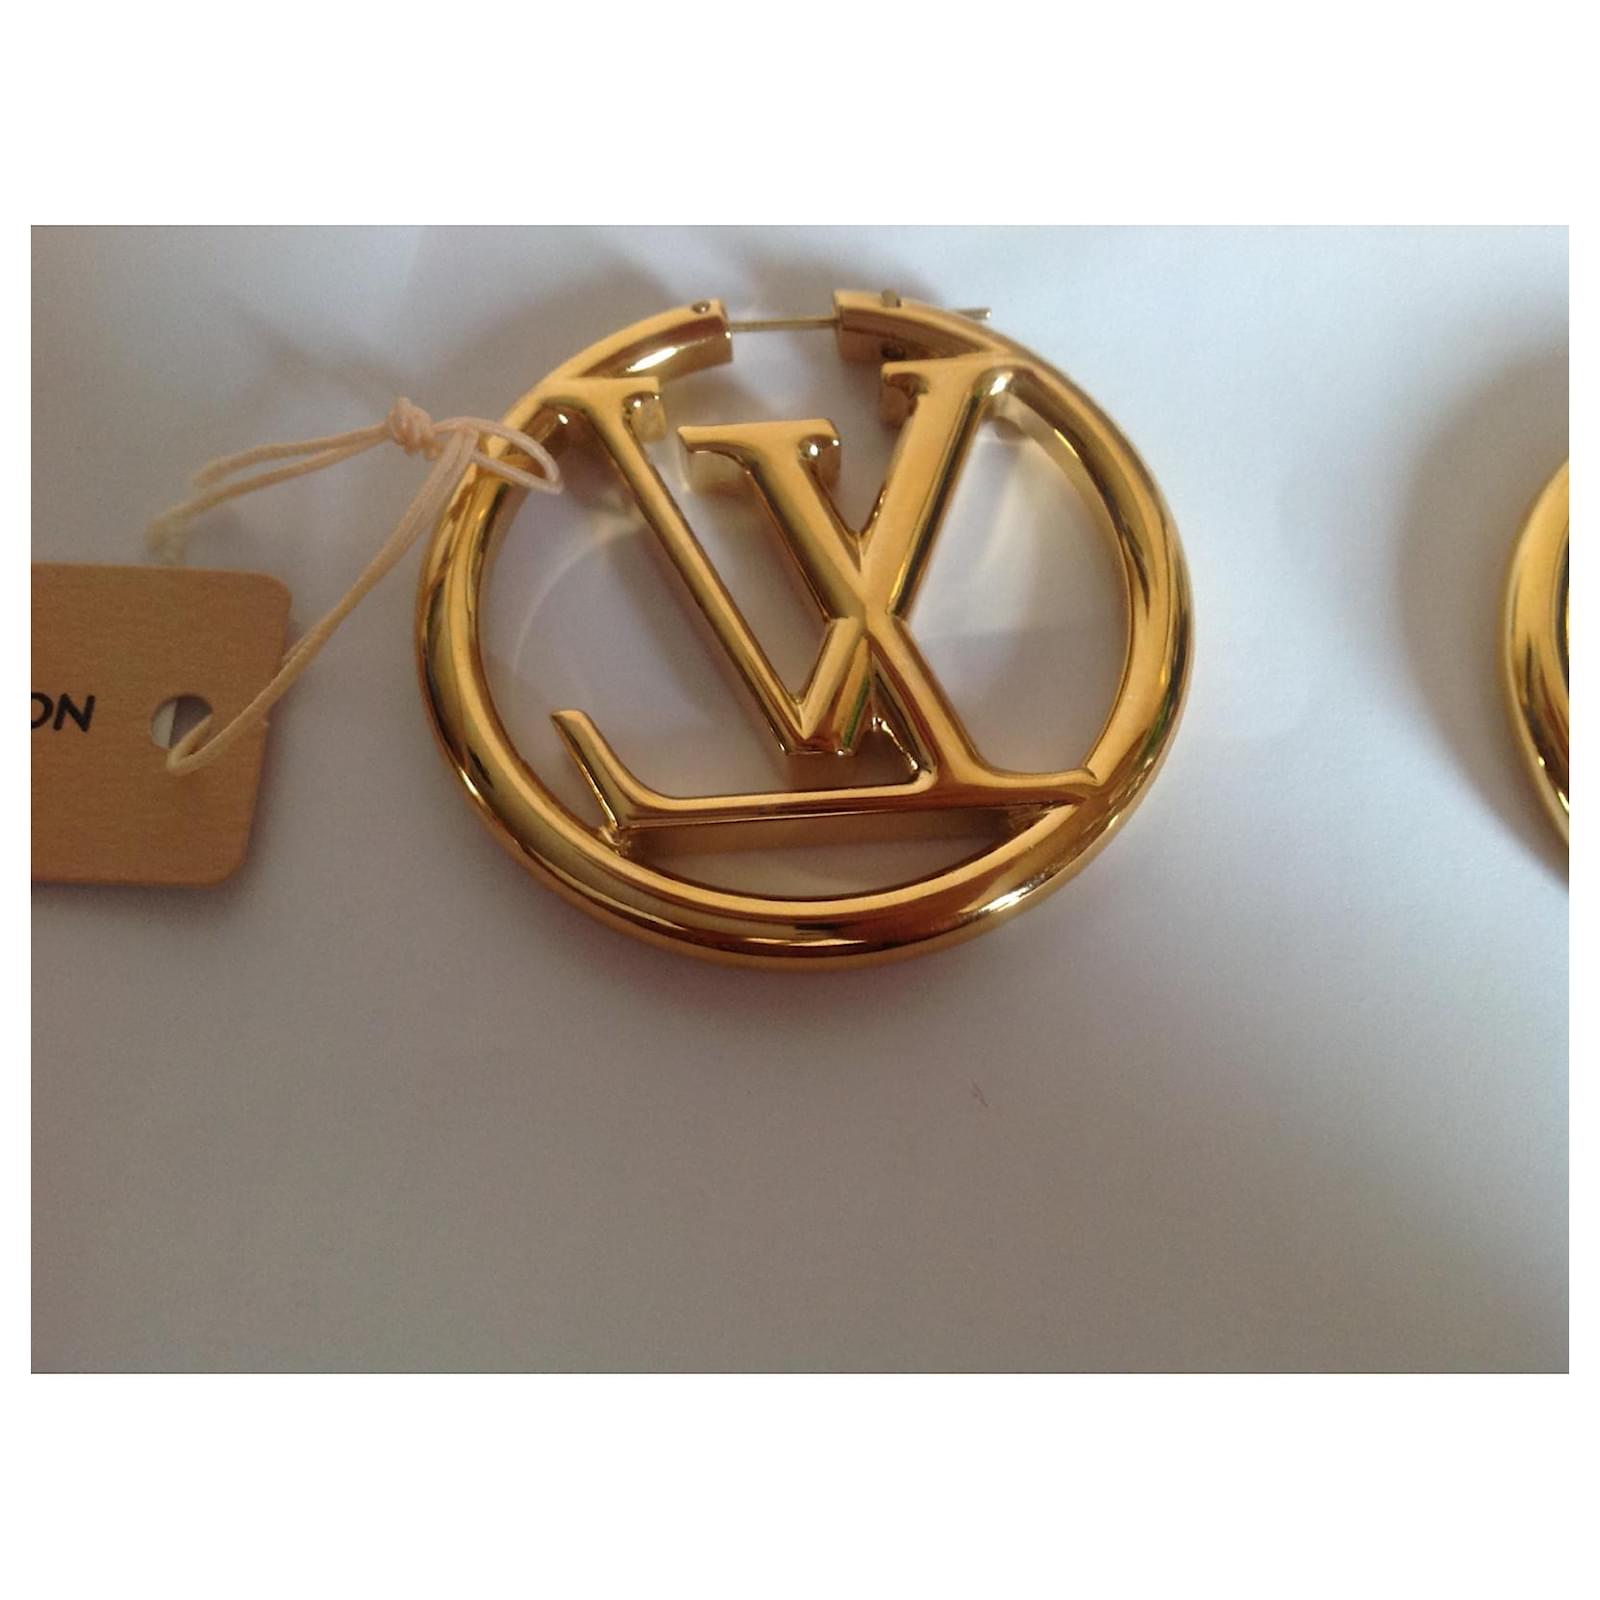 Louis Vuitton LV Iconic Earrings - Gold-Plated Stud, Earrings - LOU686680